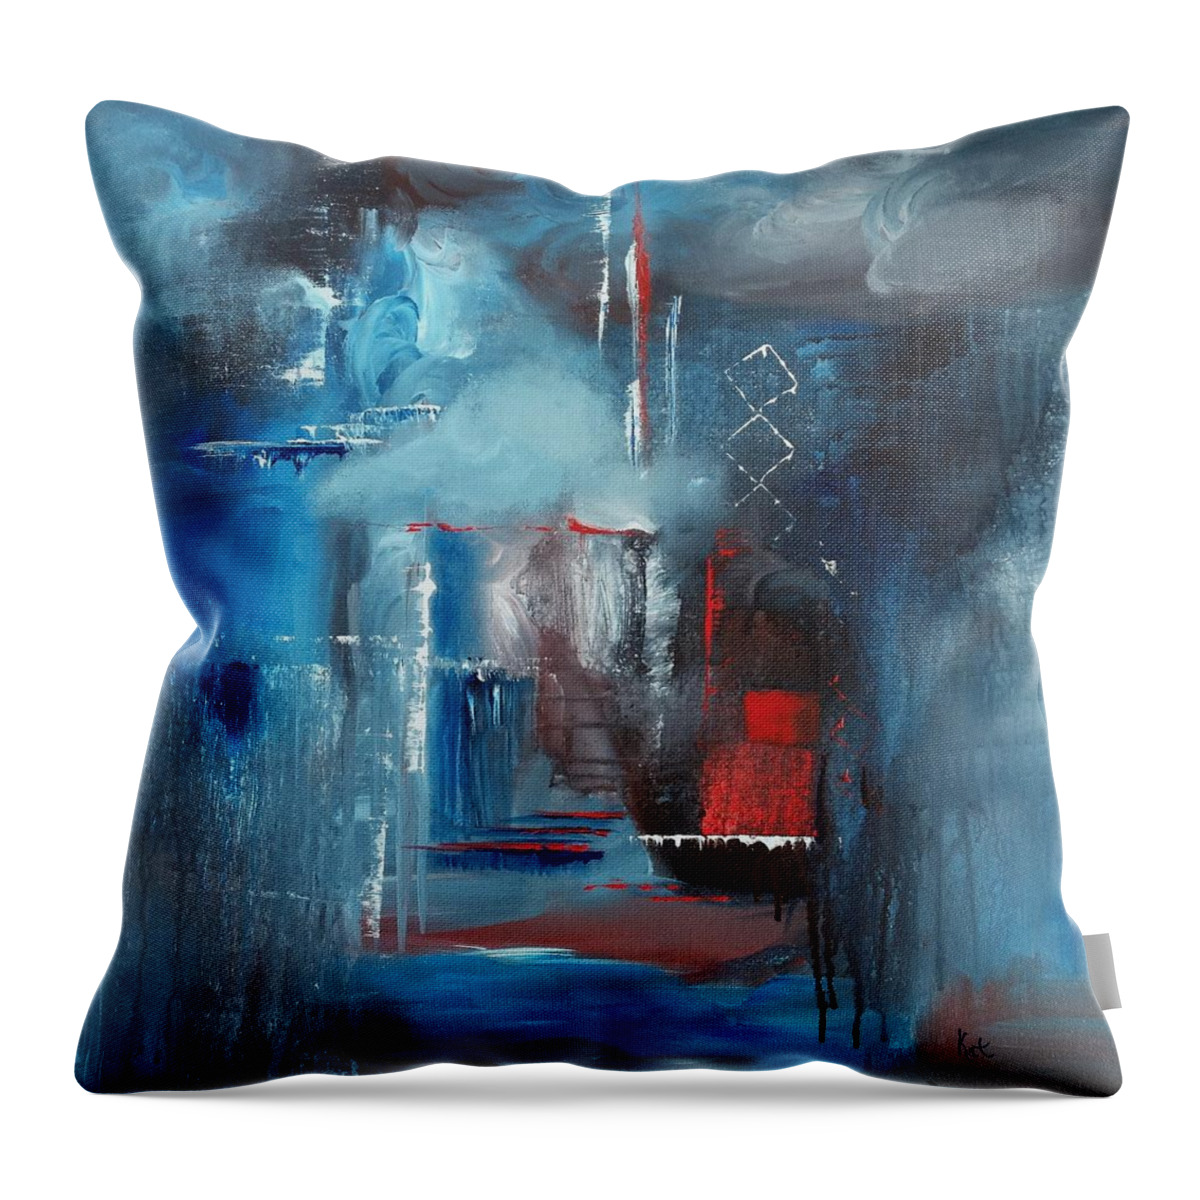 Blue Throw Pillow featuring the painting Refuge by Kat McClure